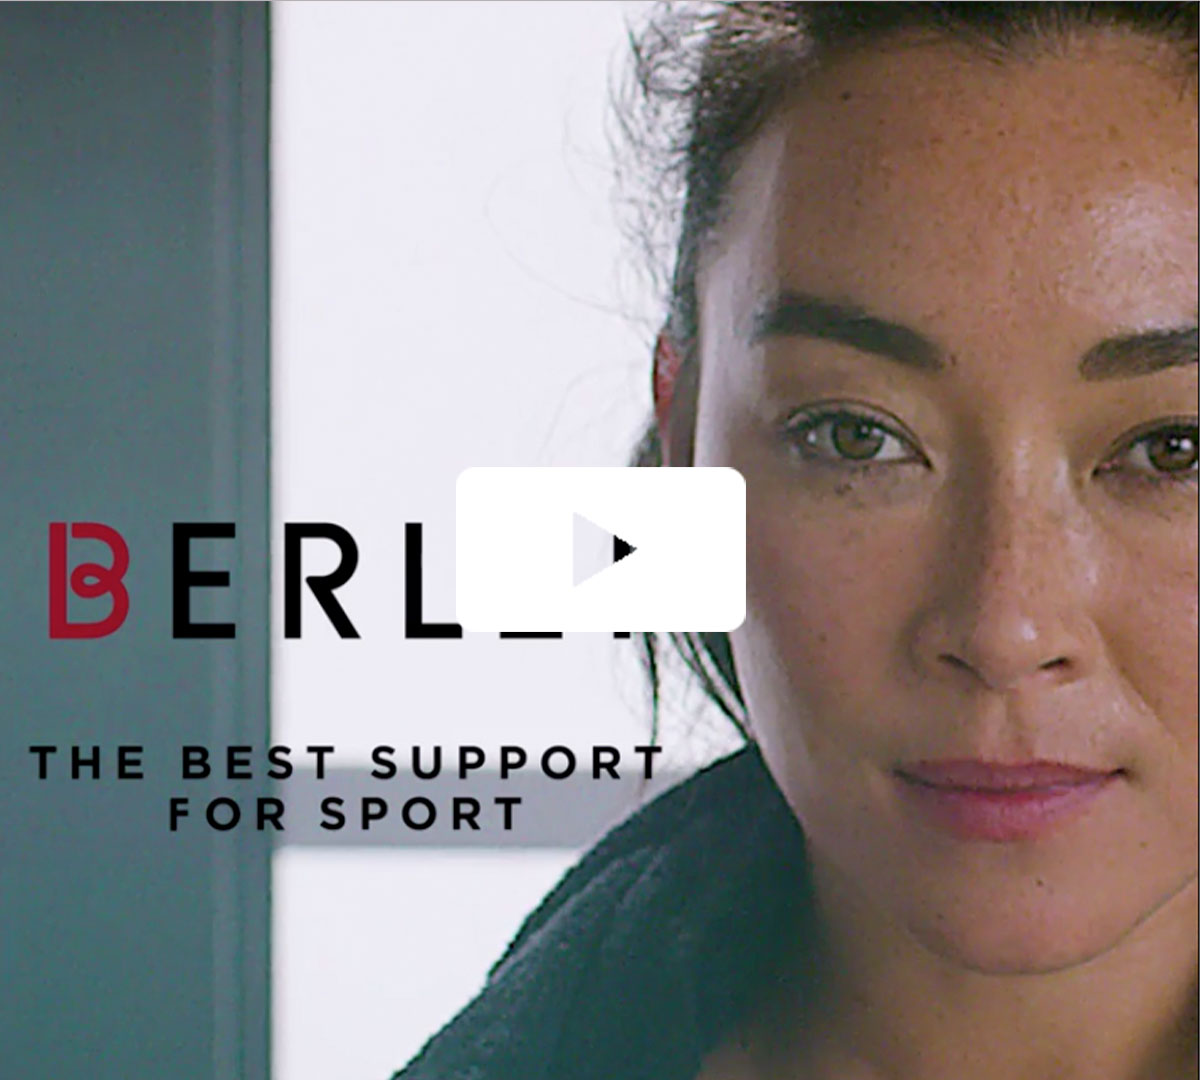 Berlei - The best support for sport. Watch now.